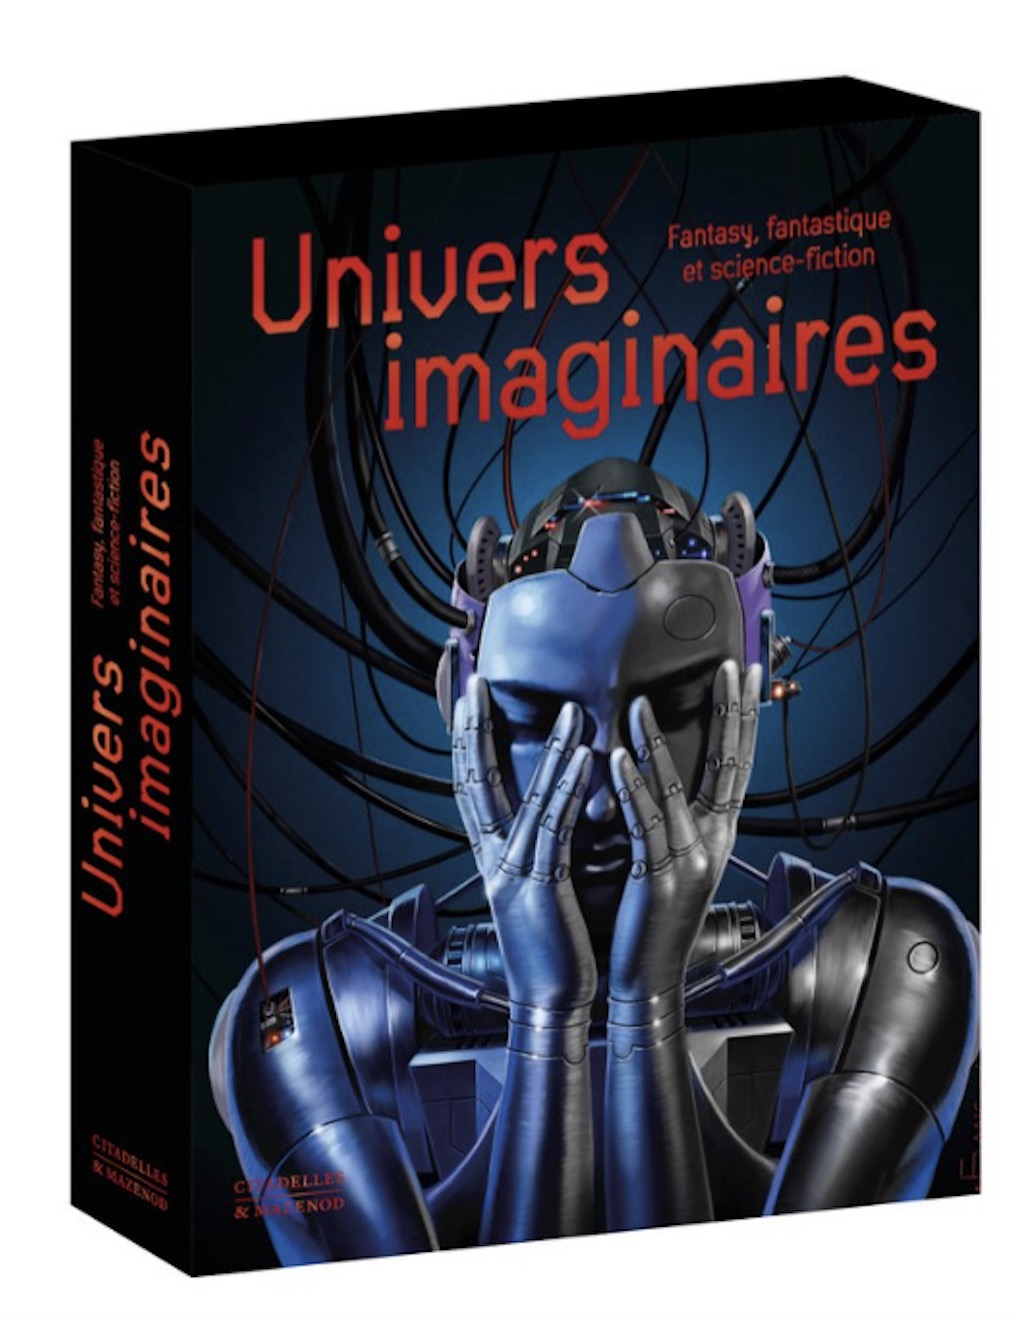 Cover Illustration by Mark Evans for Univers imaginaires by Laurent Martin